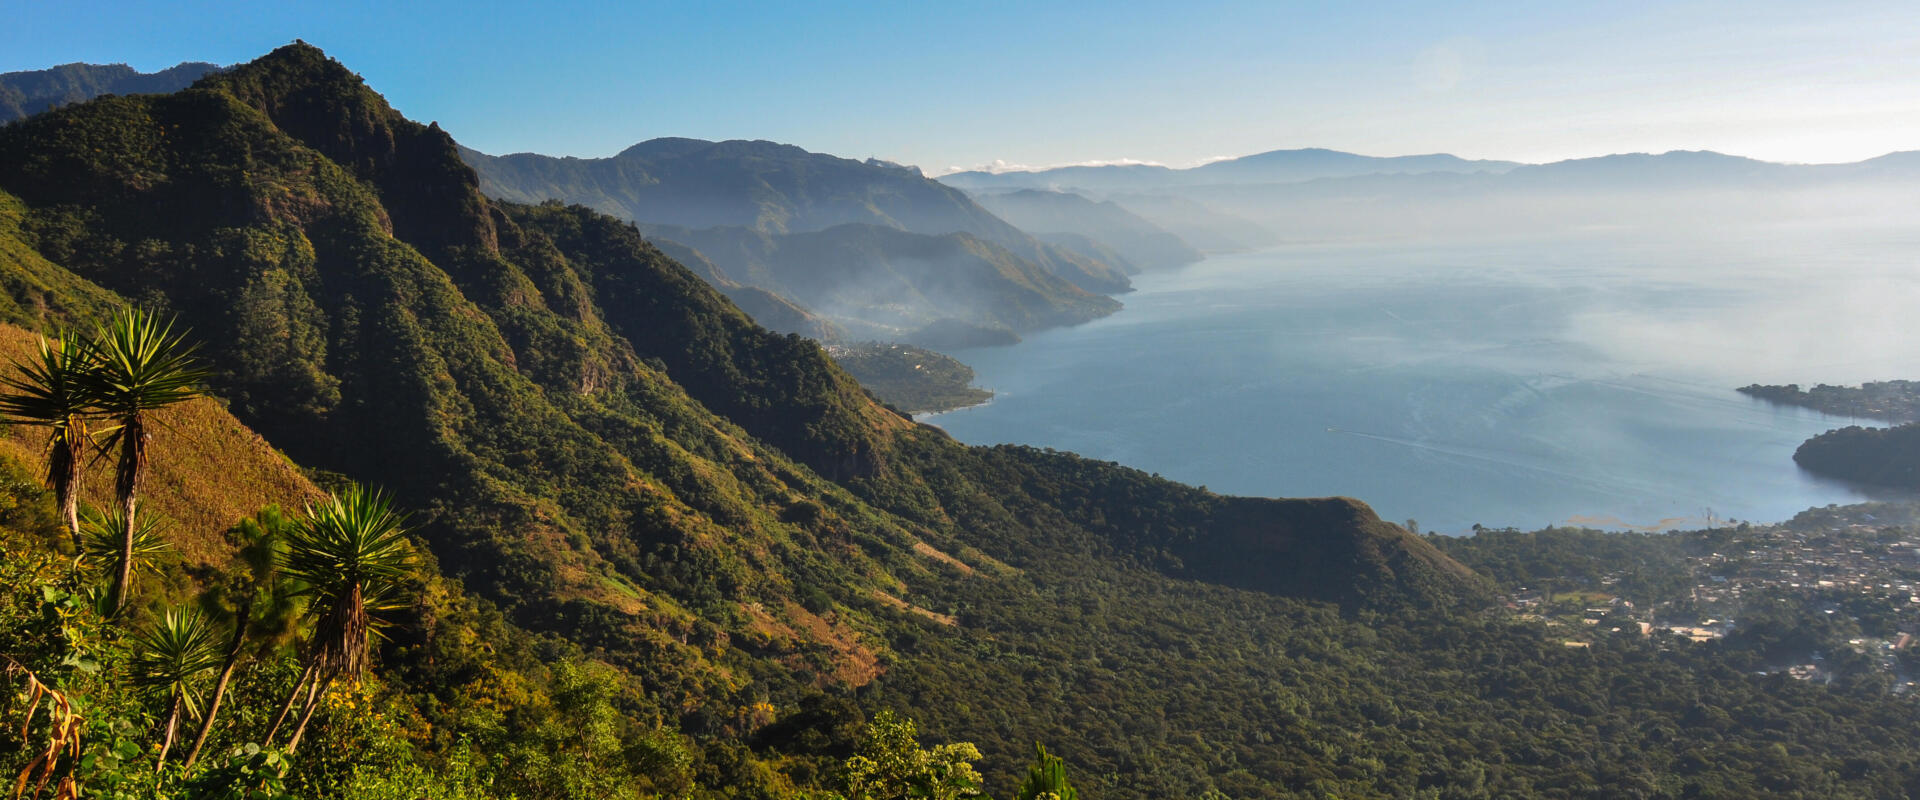 Going on a trek to Guatemala: which route should you take?